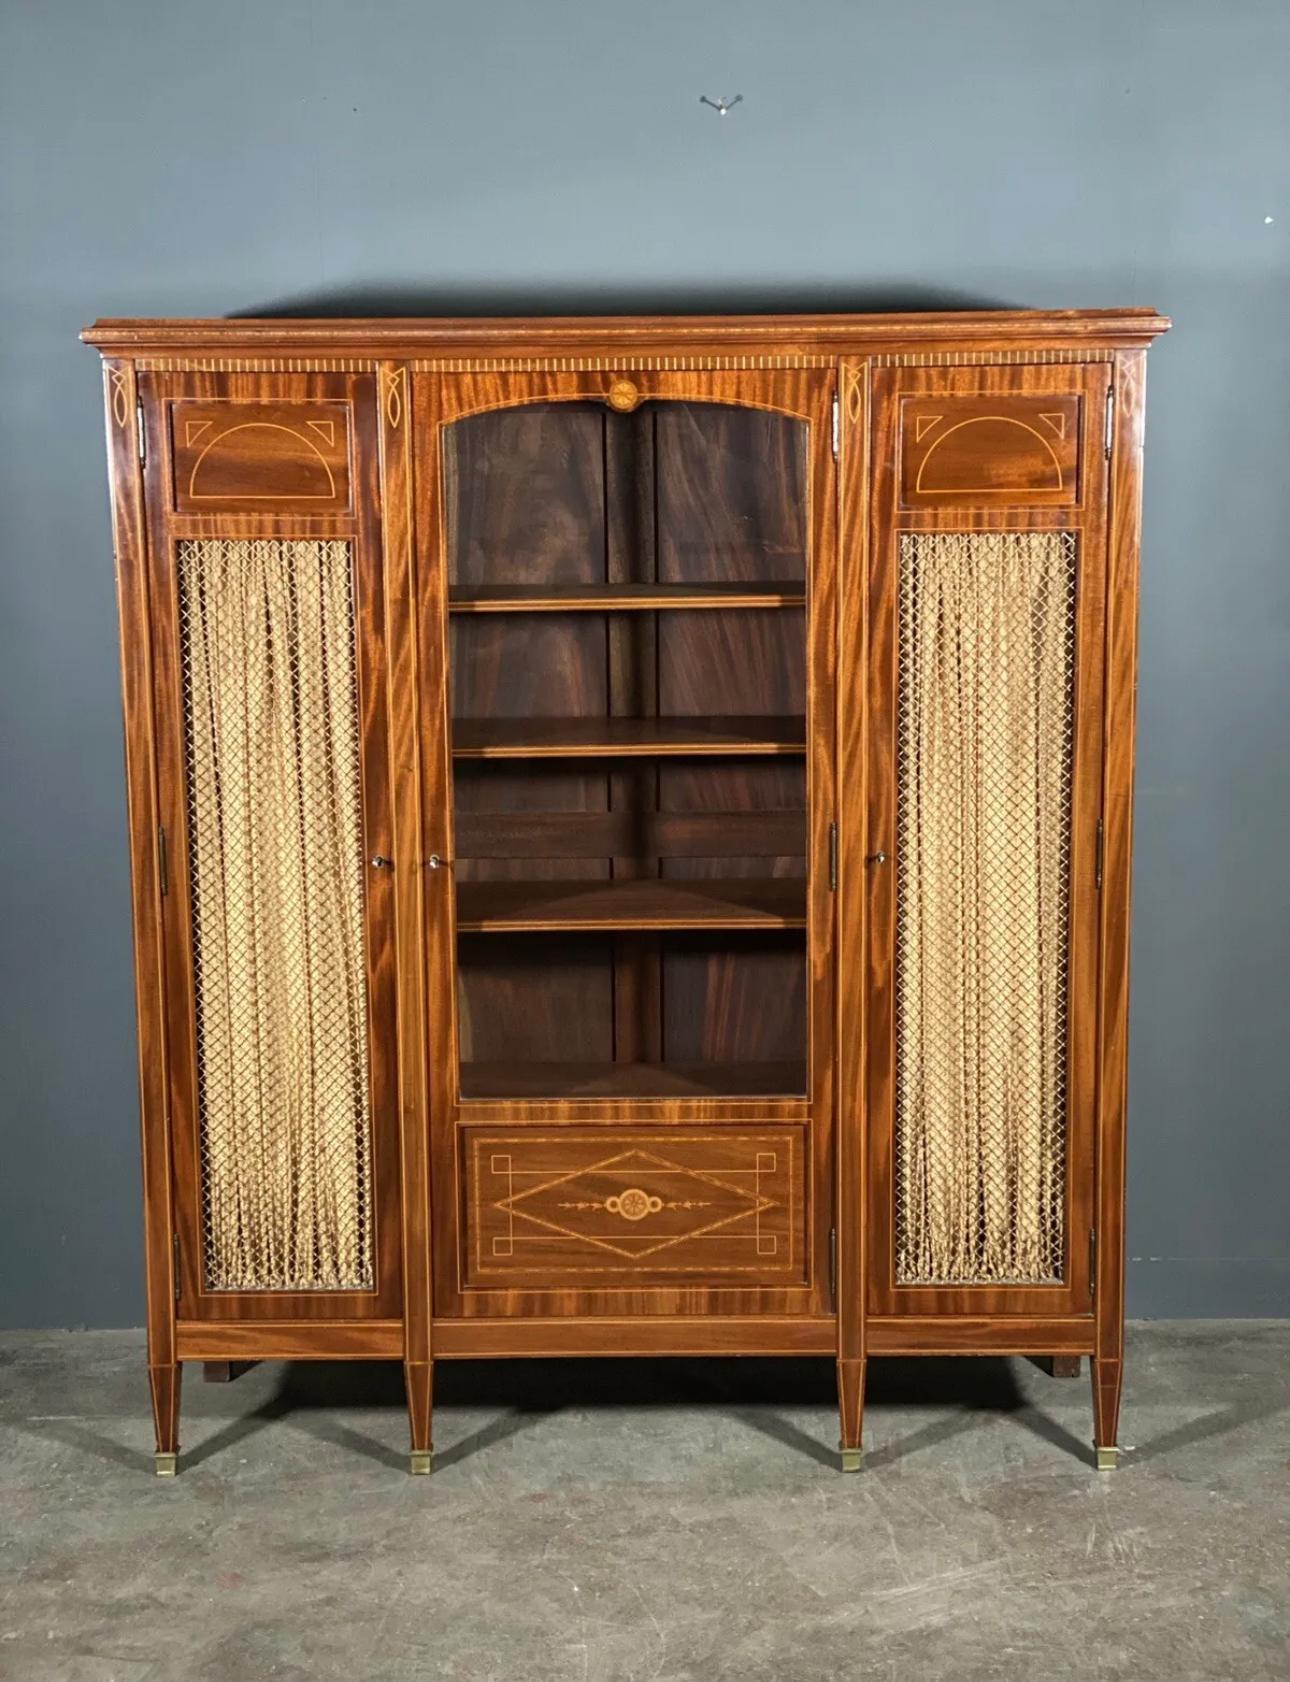 A fine quality display cabinet dating to the Edwardian period, The cabinet has two side cupboards with original brass grill and curtain, with a main glazed centre cupboard all of which have fully adjustable shelves. In very good condition with each